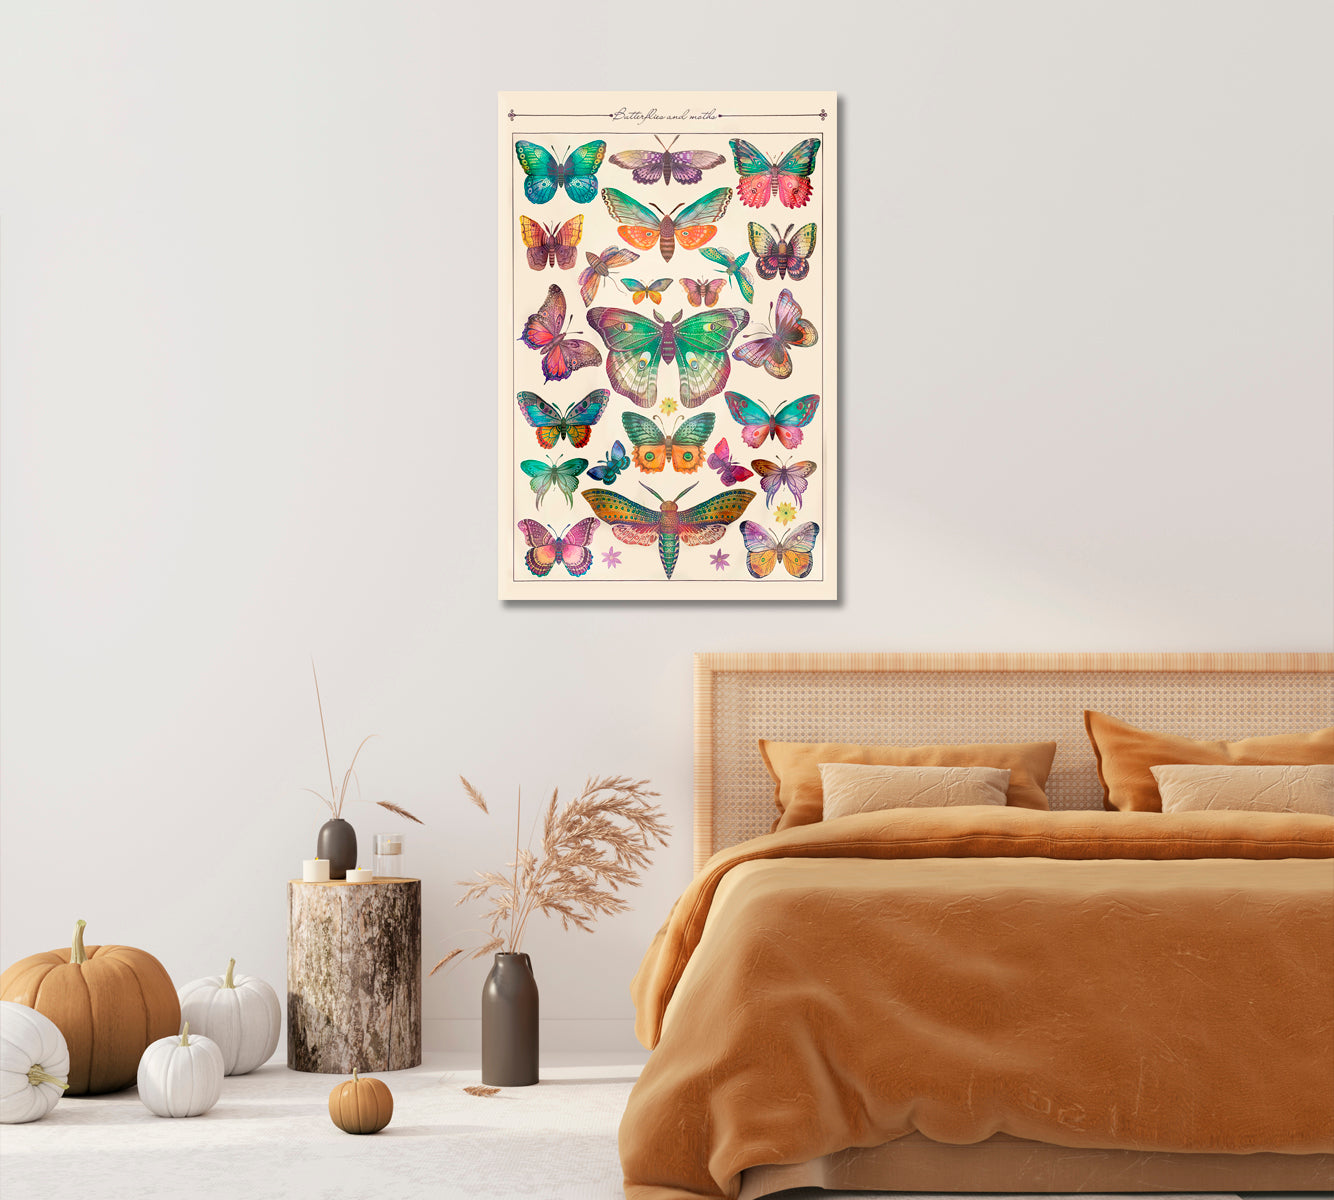 Vintage Butterfly Canvas Home Wall Art-Canvas Print-CetArt-1 panel-16x24 inches-CetArt